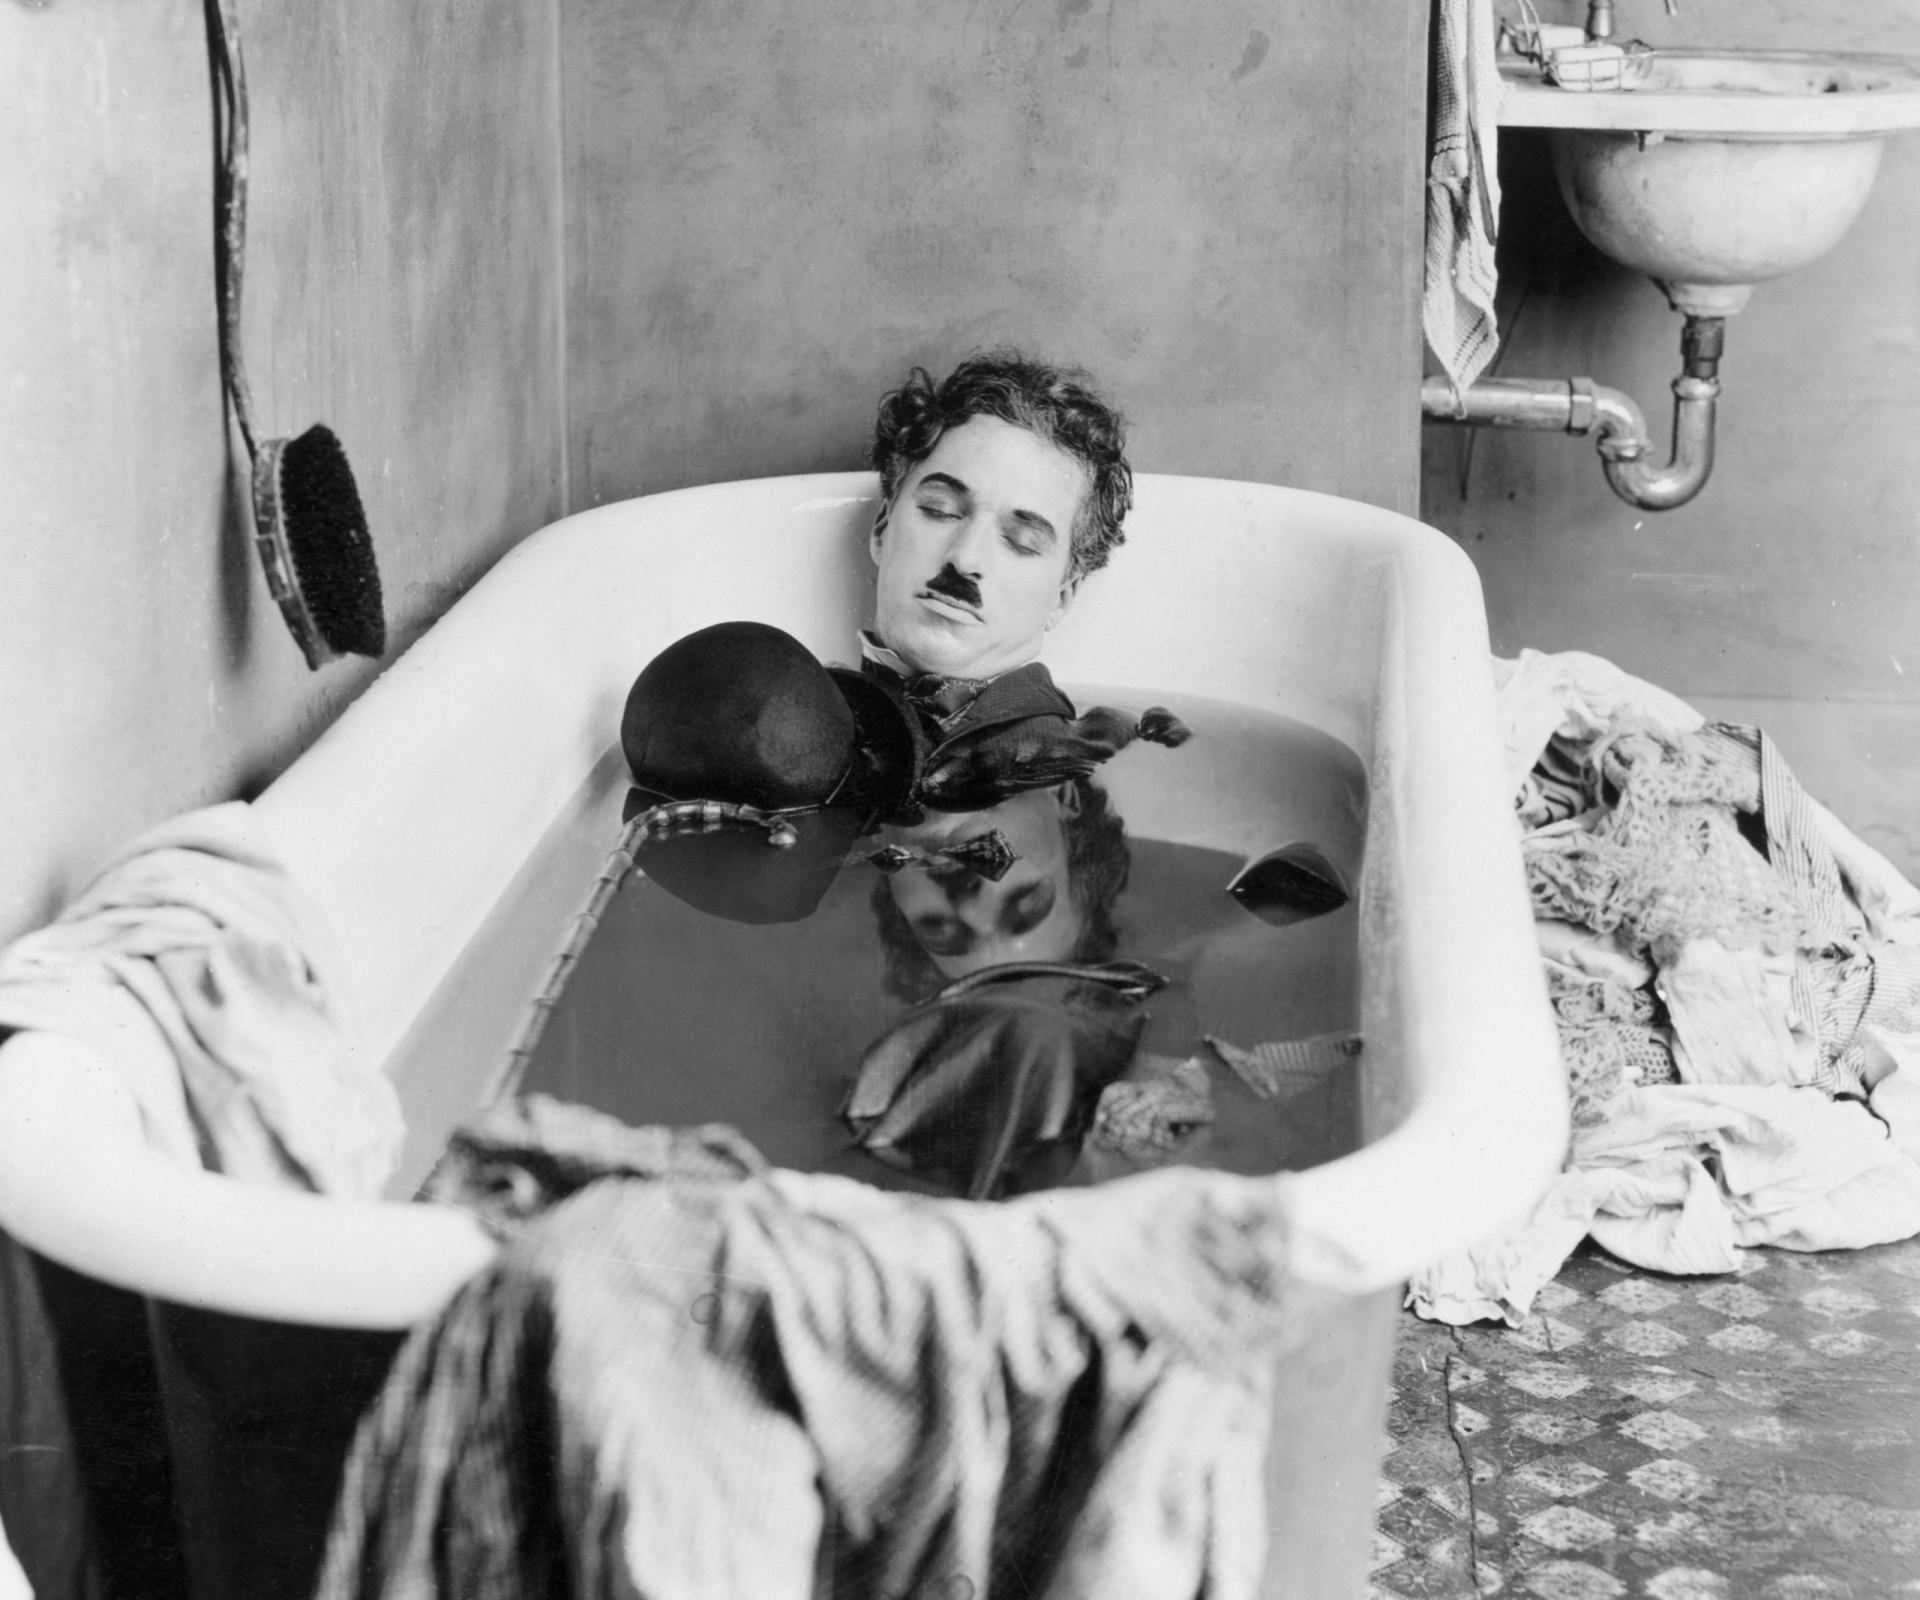 <p>Charlie Chaplin dozes off in the bathtub in a hilarious scene from the silent short film 'Pay Day.' He also wrote and directed the picture.</p><p>You may also like:<a href="https://www.starsinsider.com/n/367065?utm_source=msn.com&utm_medium=display&utm_campaign=referral_description&utm_content=546036en-en"> The brainiest star signs based on Nobel Prize winners</a></p>